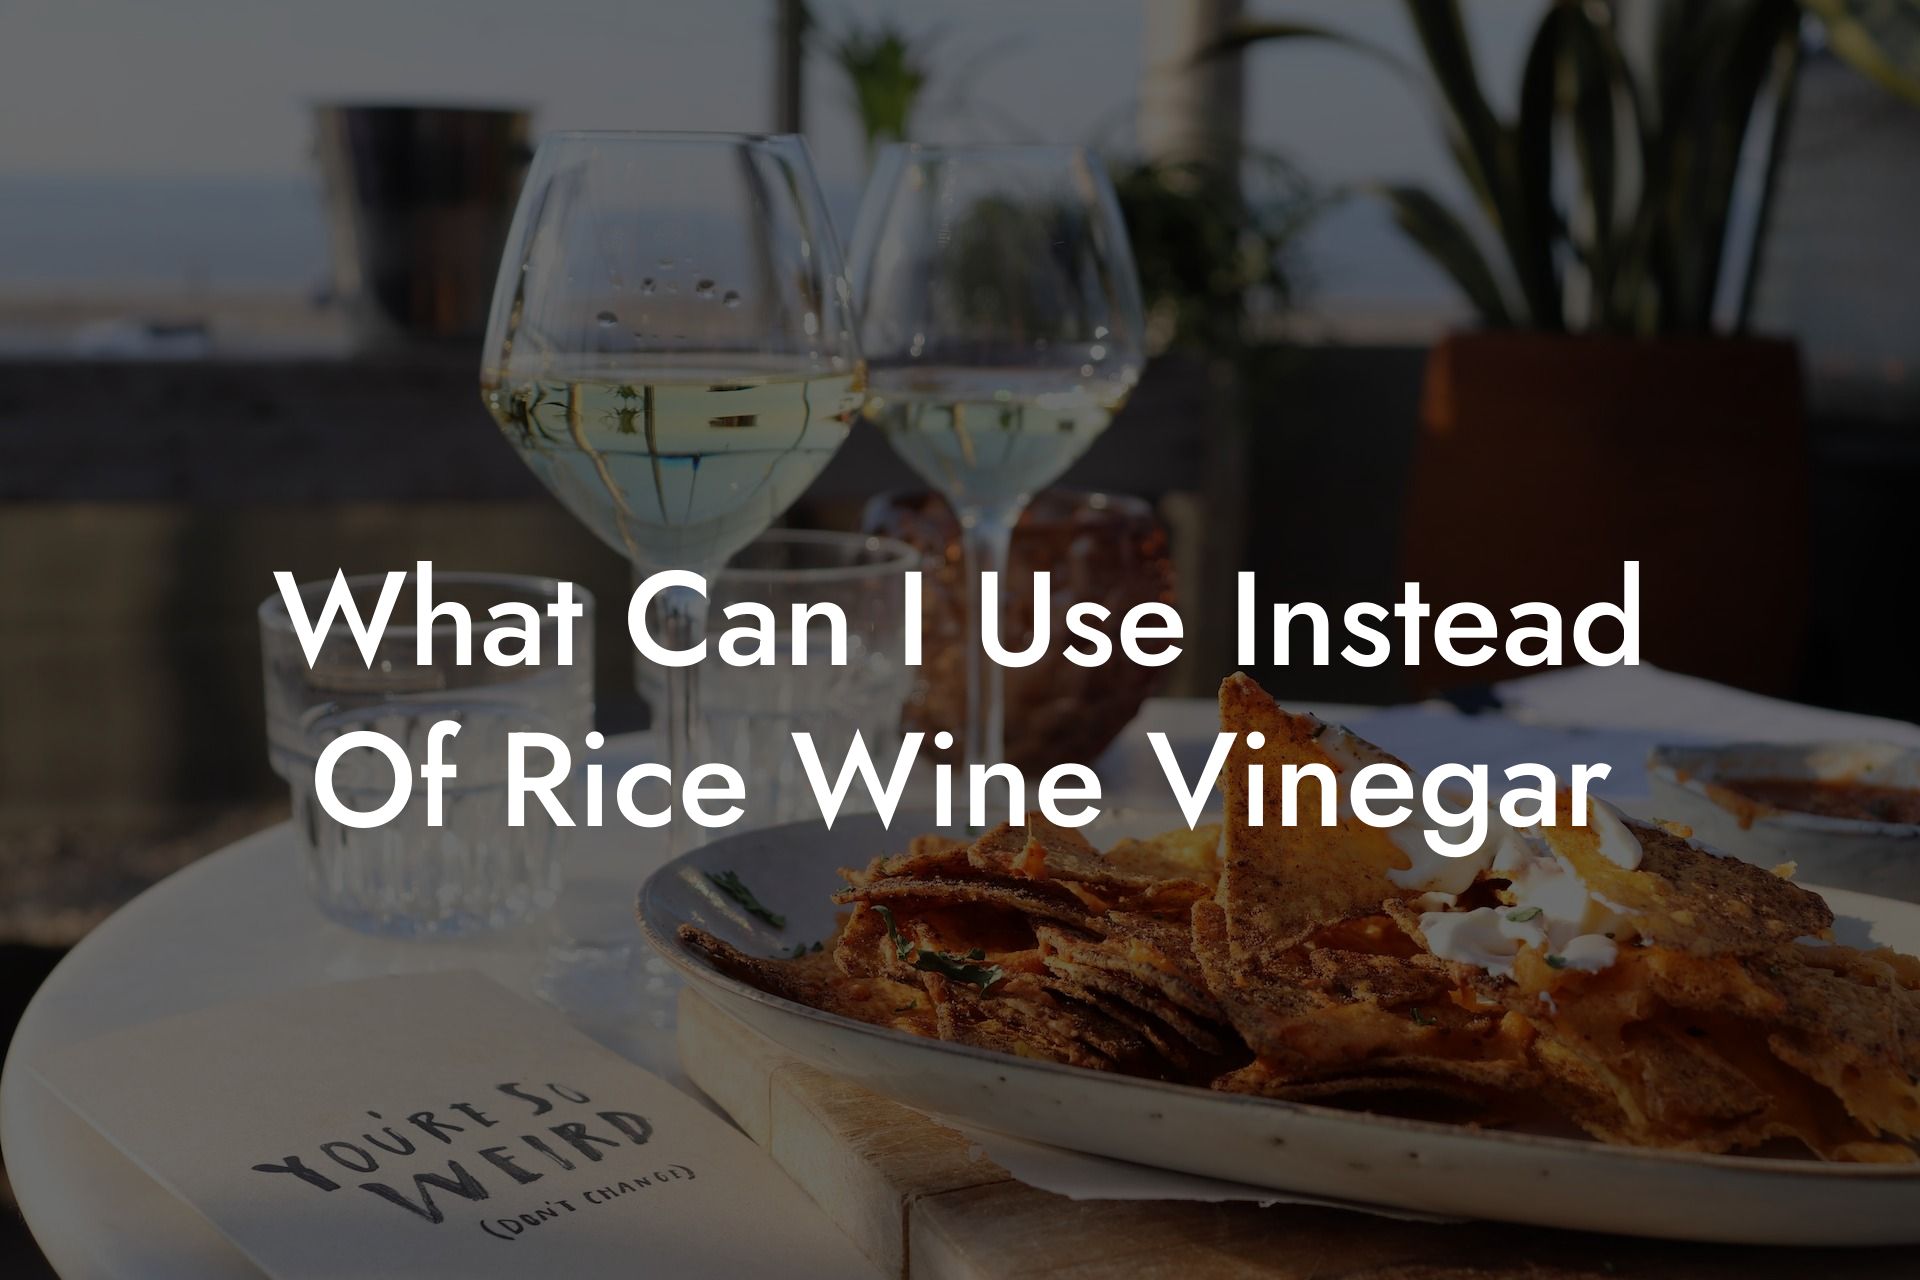 What Can I Use Instead Of Rice Wine Vinegar